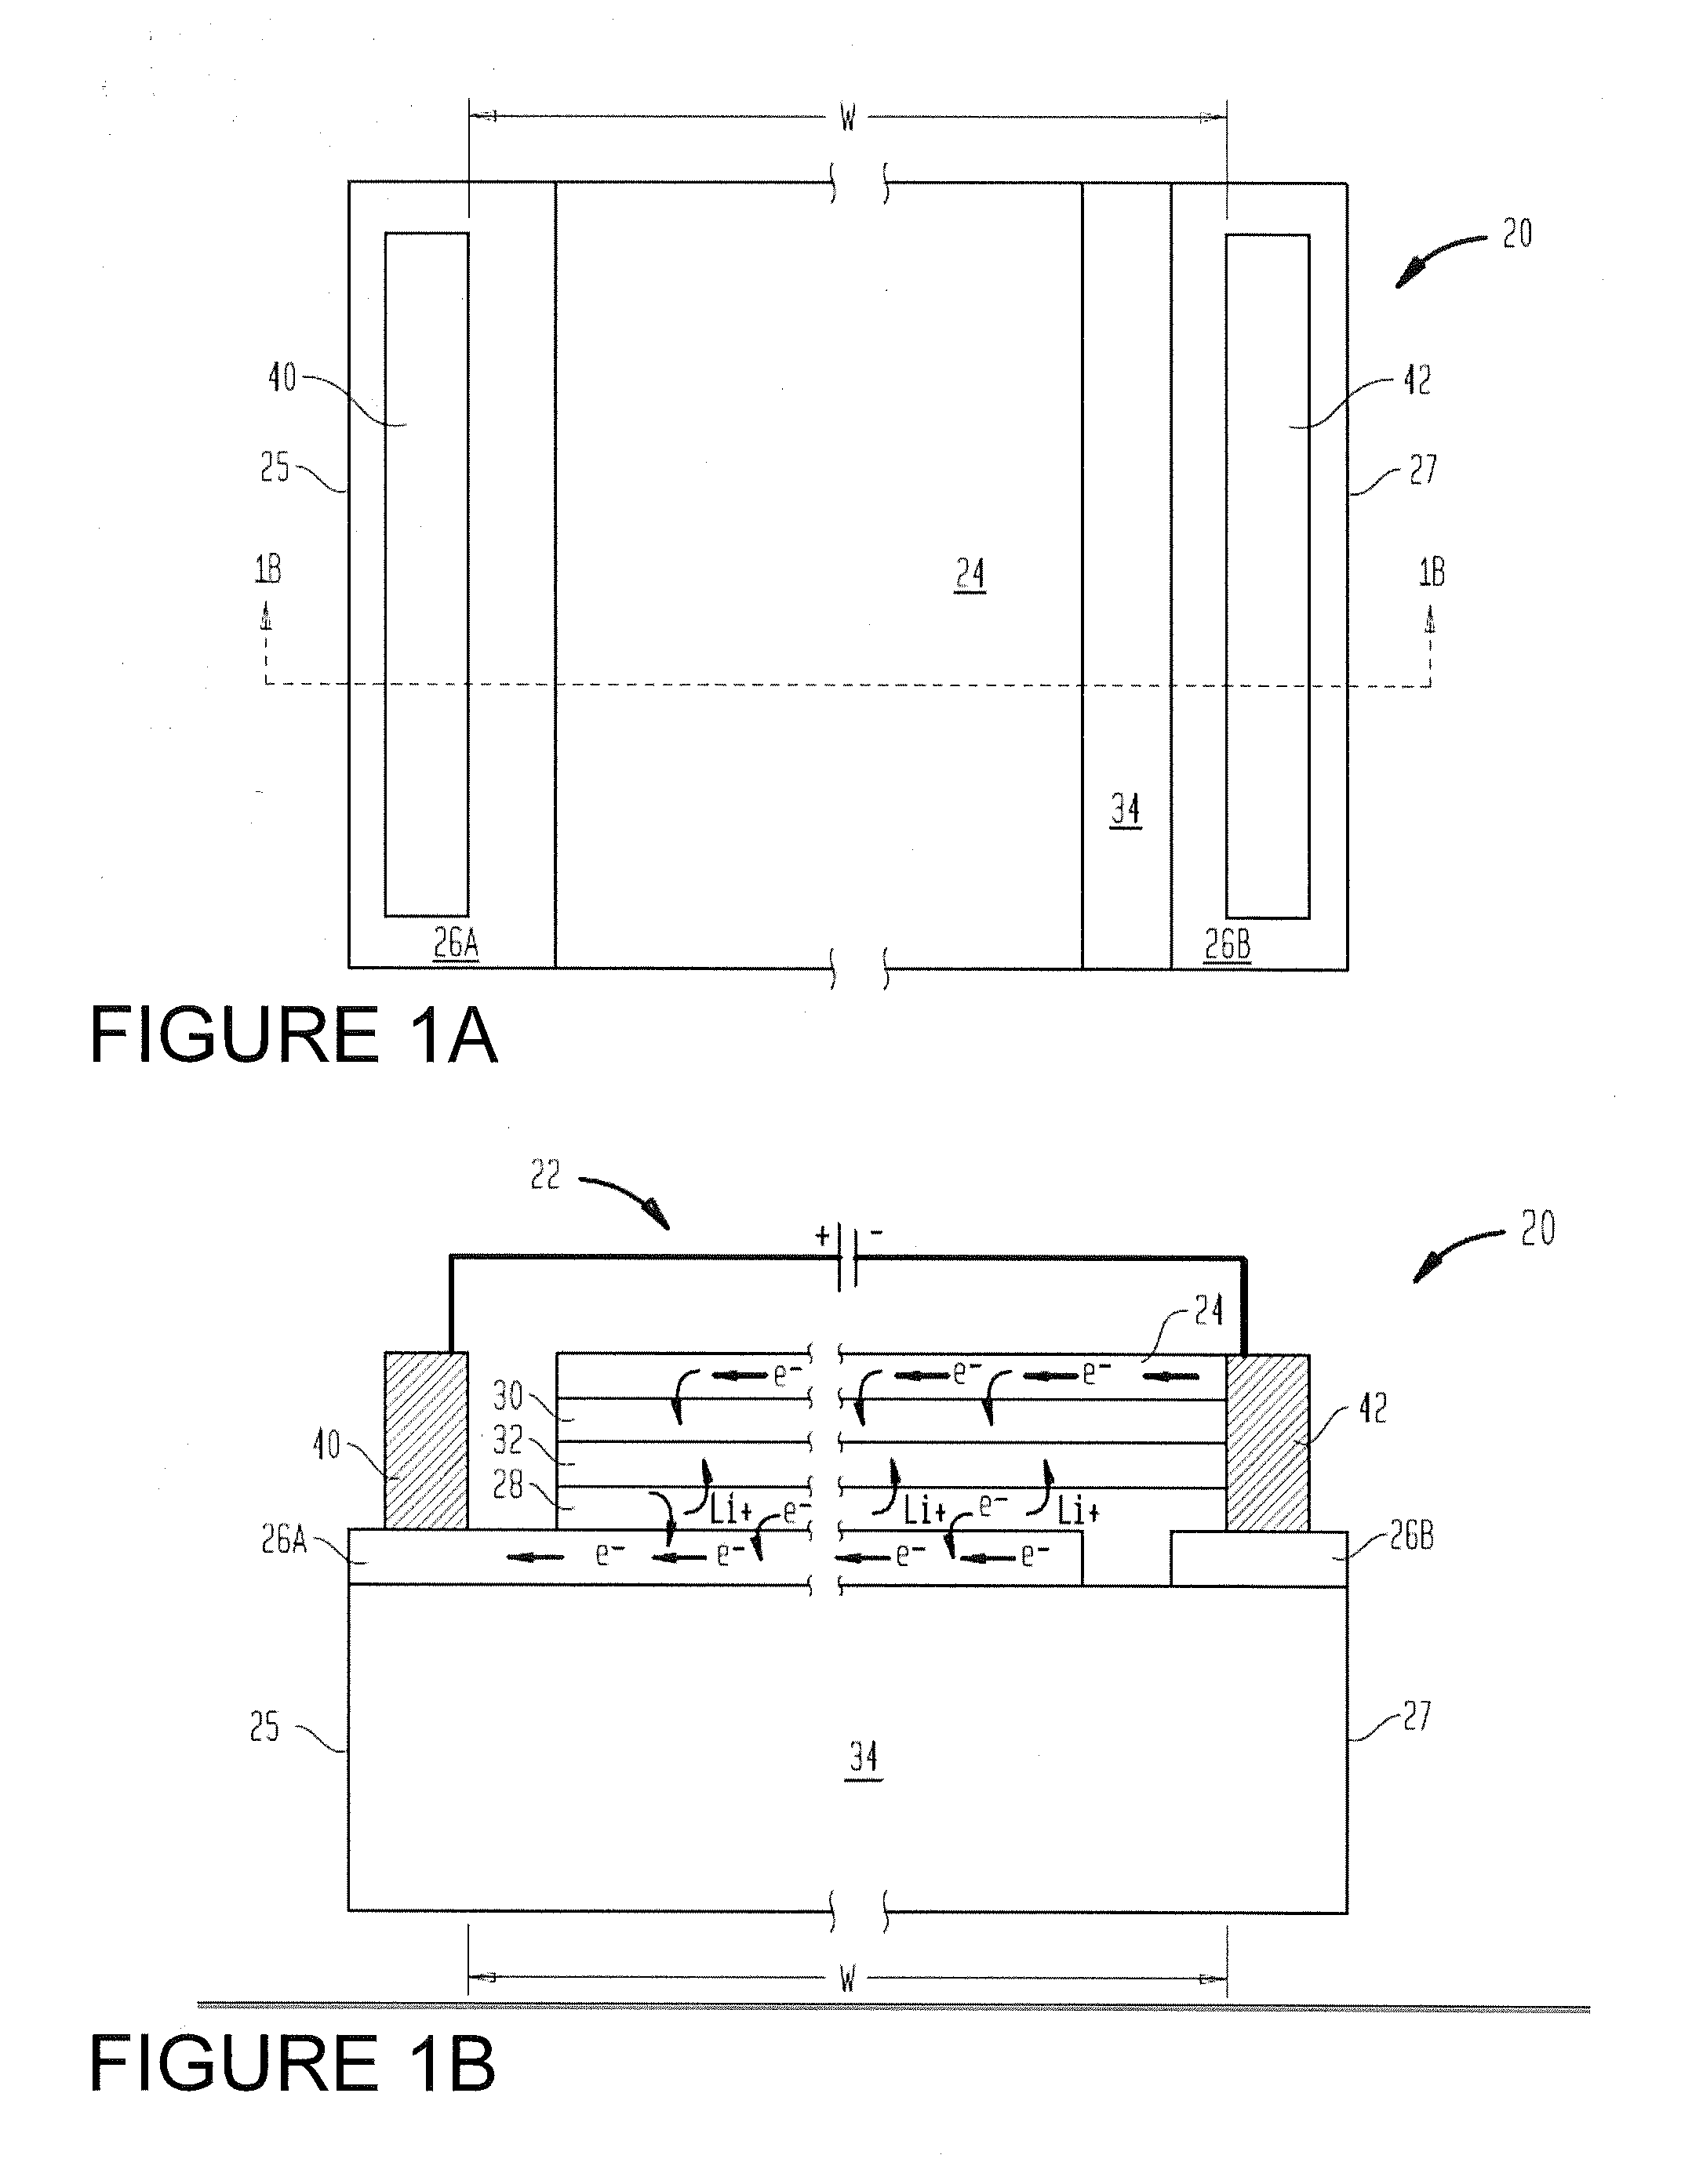 Control System For Color Rendering Of Optical Glazings